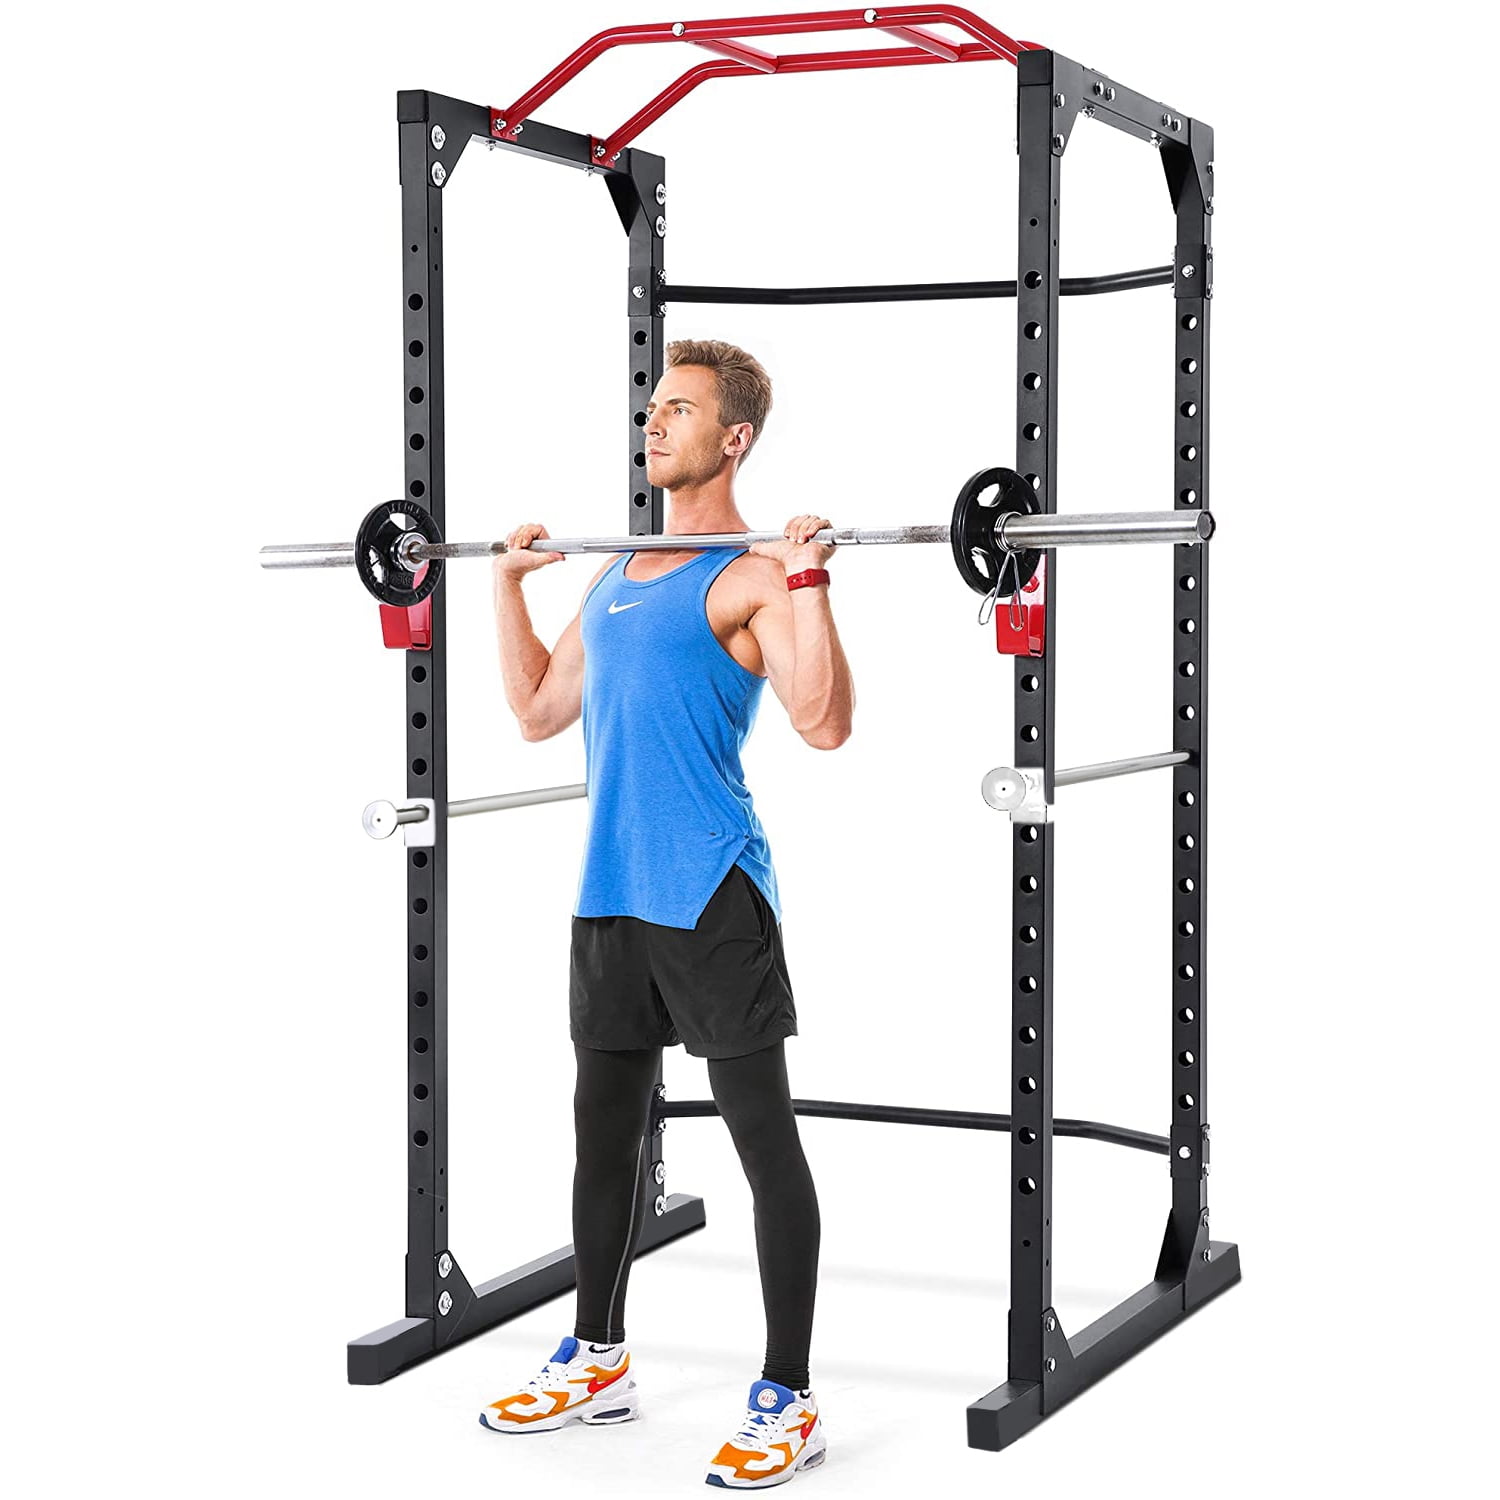 Mousport Power Cage Squat Rack Cage Weight Cage Power Rack Home Gym with 19-Level Adjustable and J-Hooks Heavy Duty for 1000 lbs Capacity for Barbell Lifting Squat Stand Push ups 